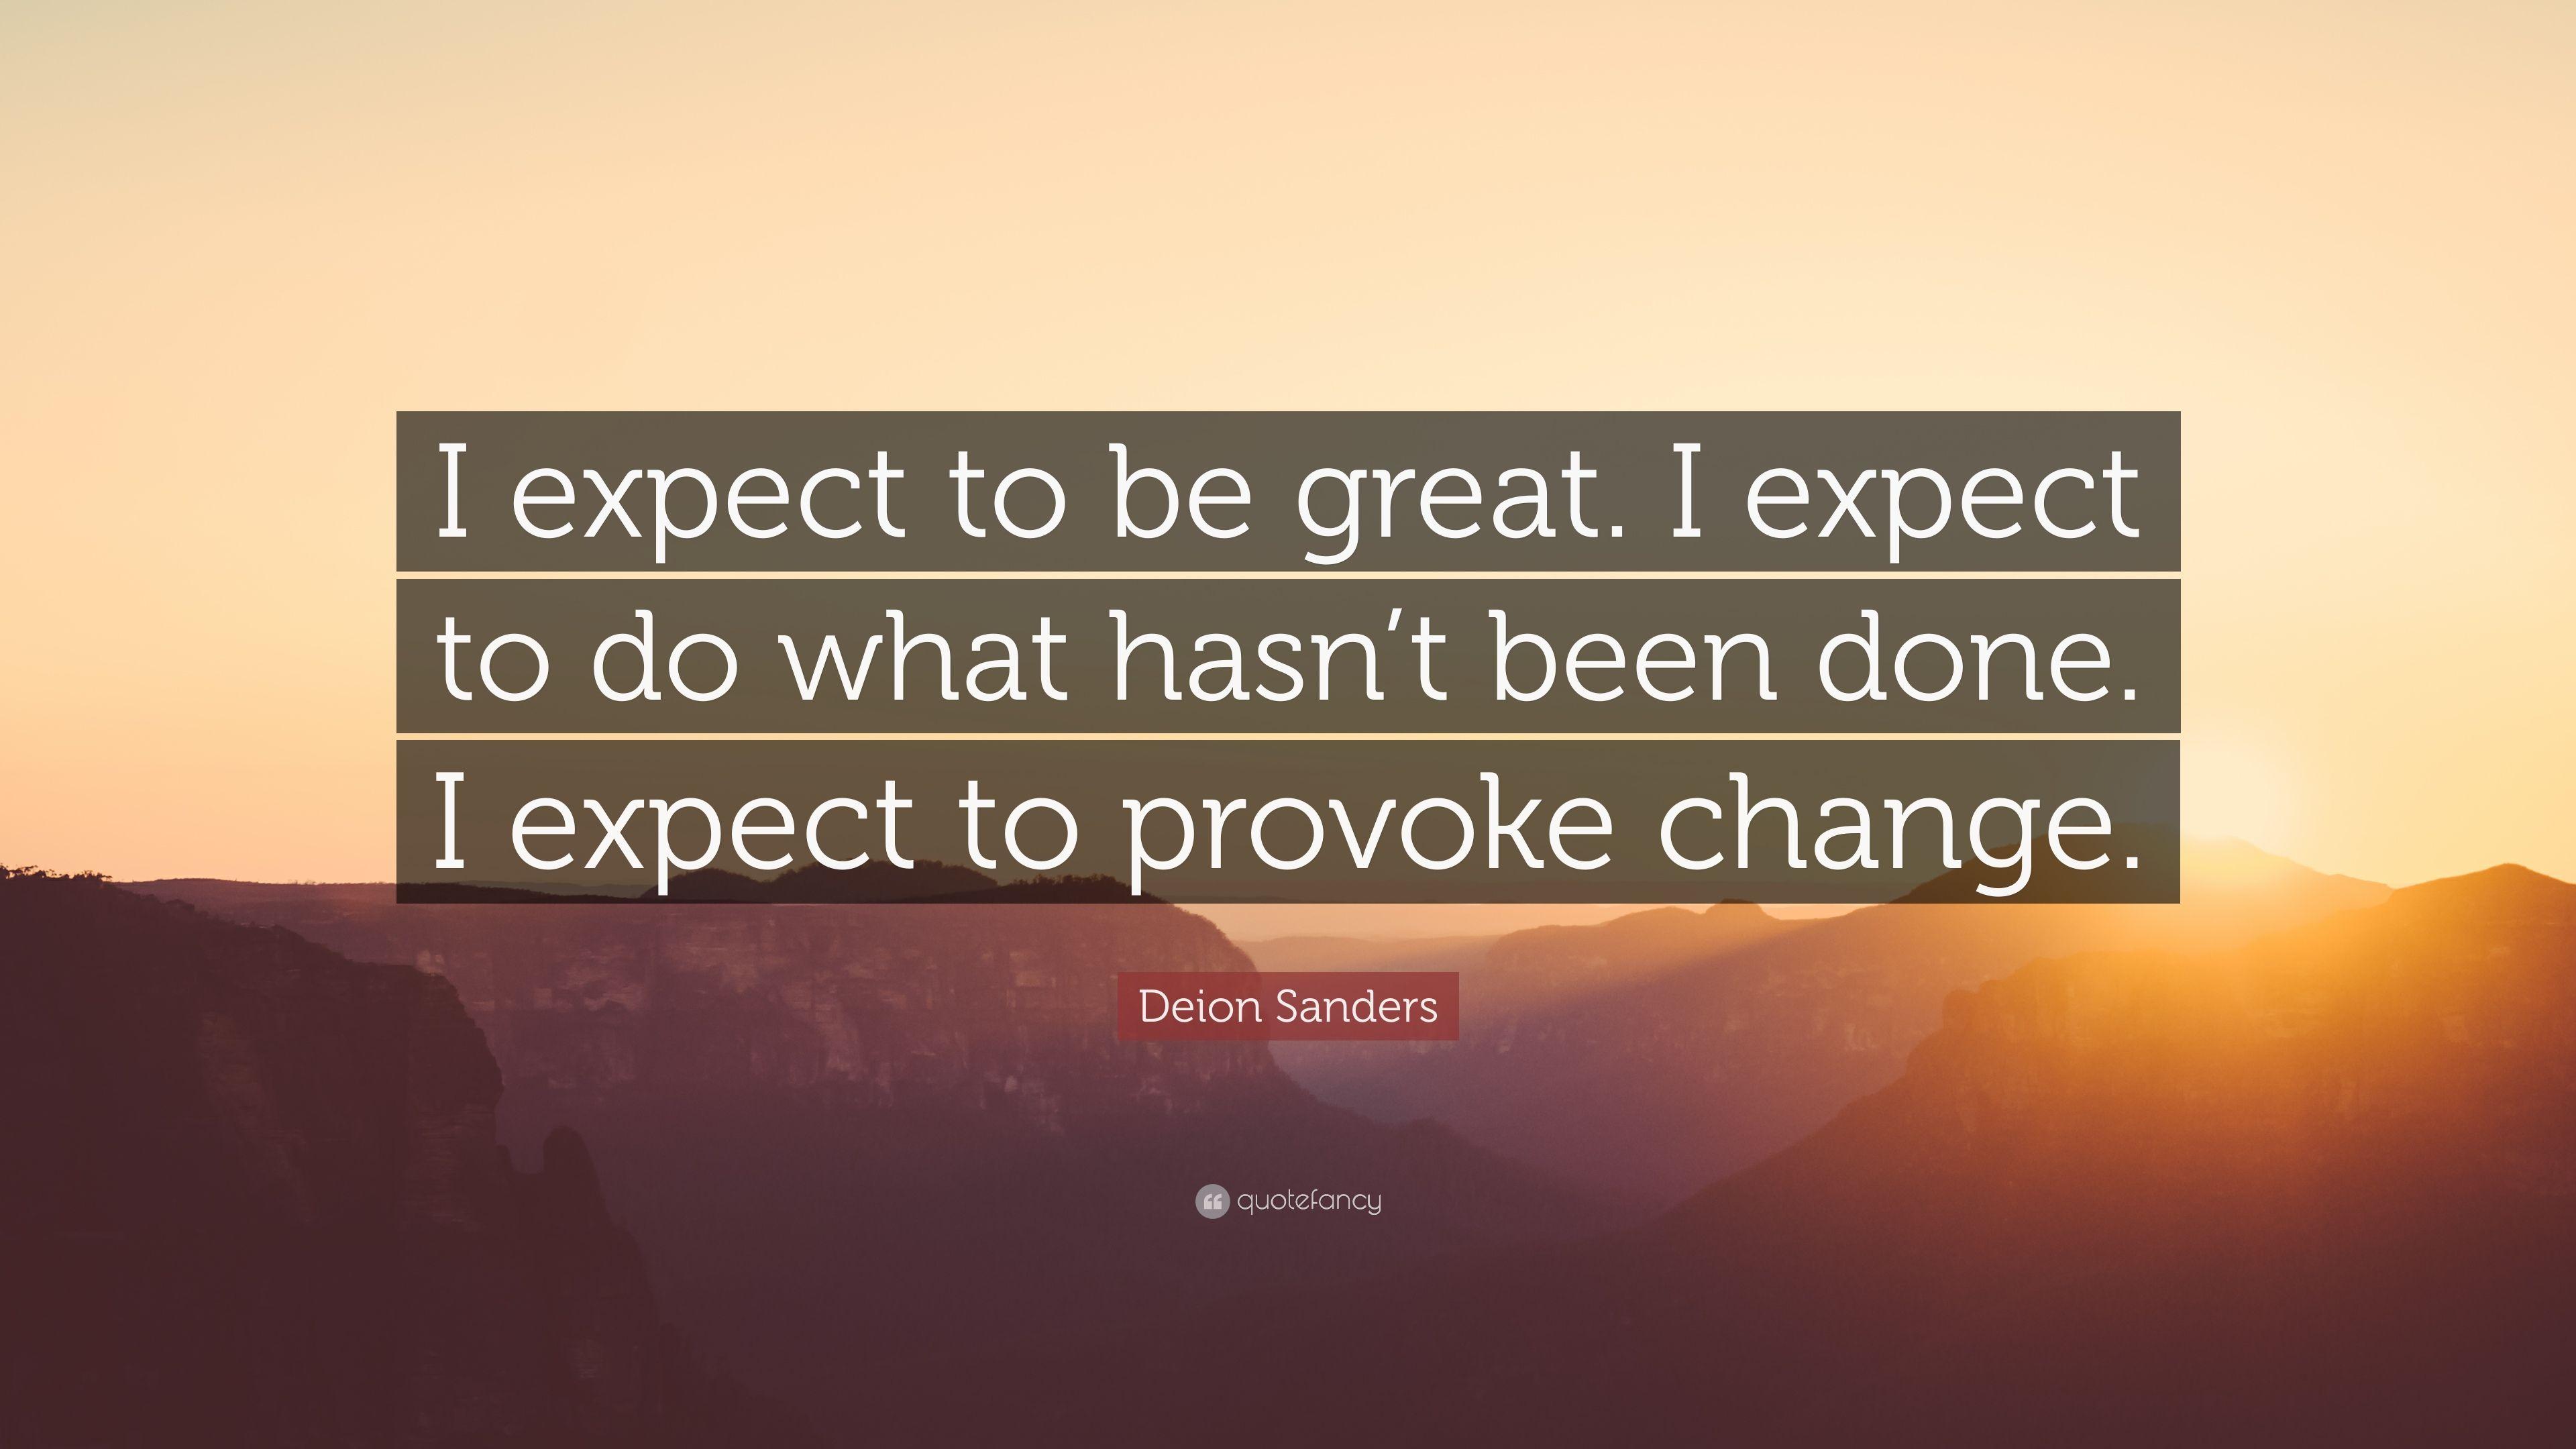 Deion Sanders Quote: “I expect to be great. I expect to do what hasn